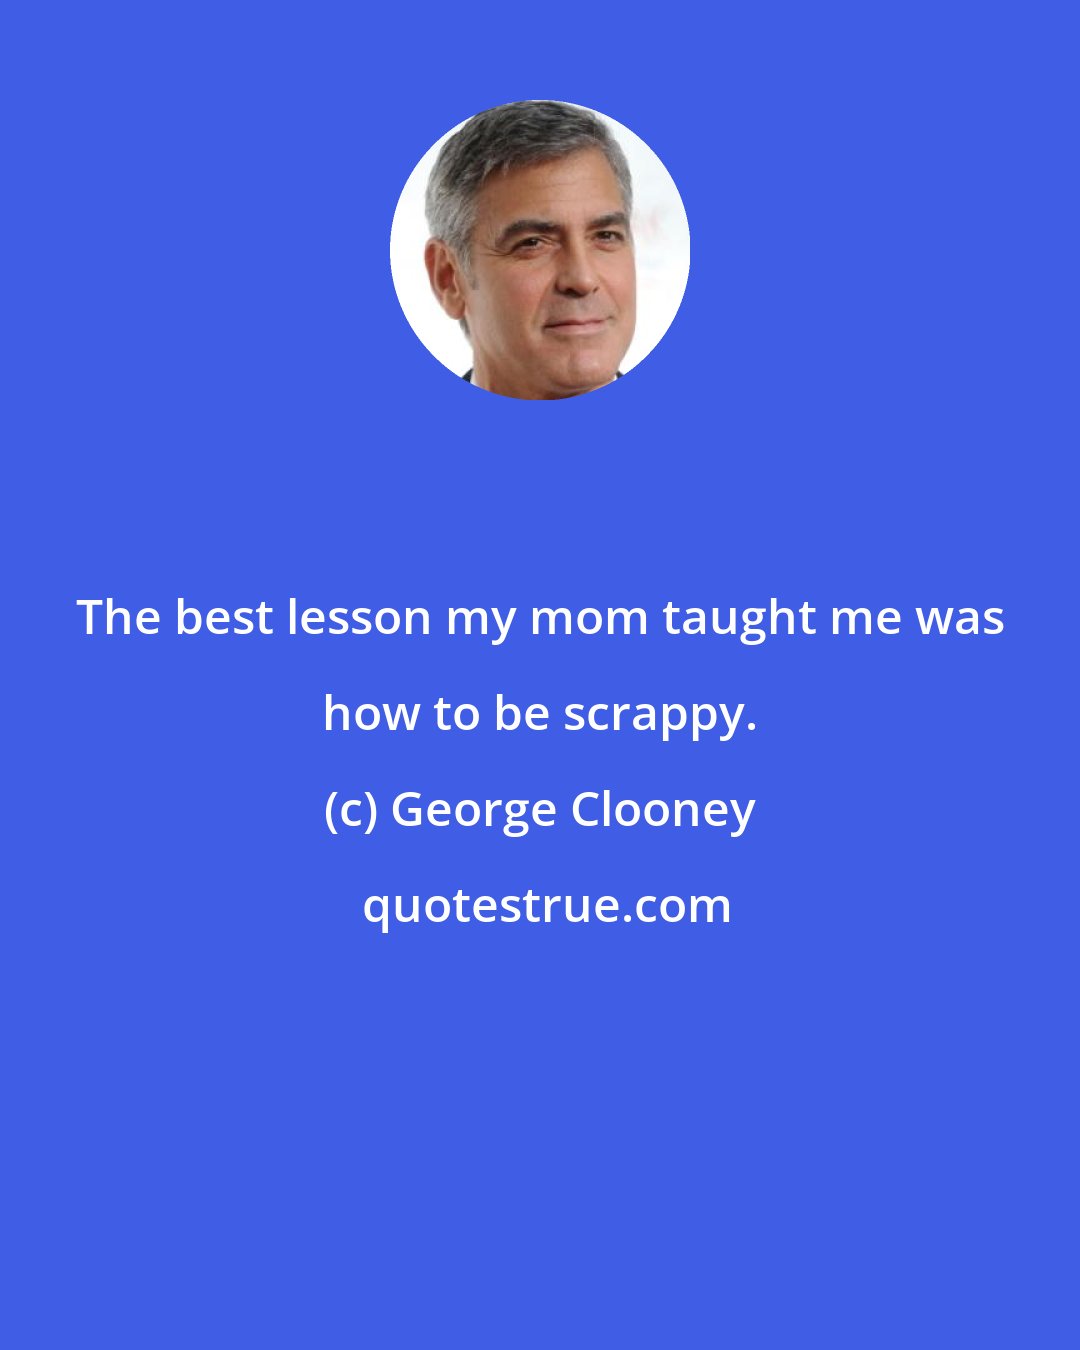 George Clooney: The best lesson my mom taught me was how to be scrappy.